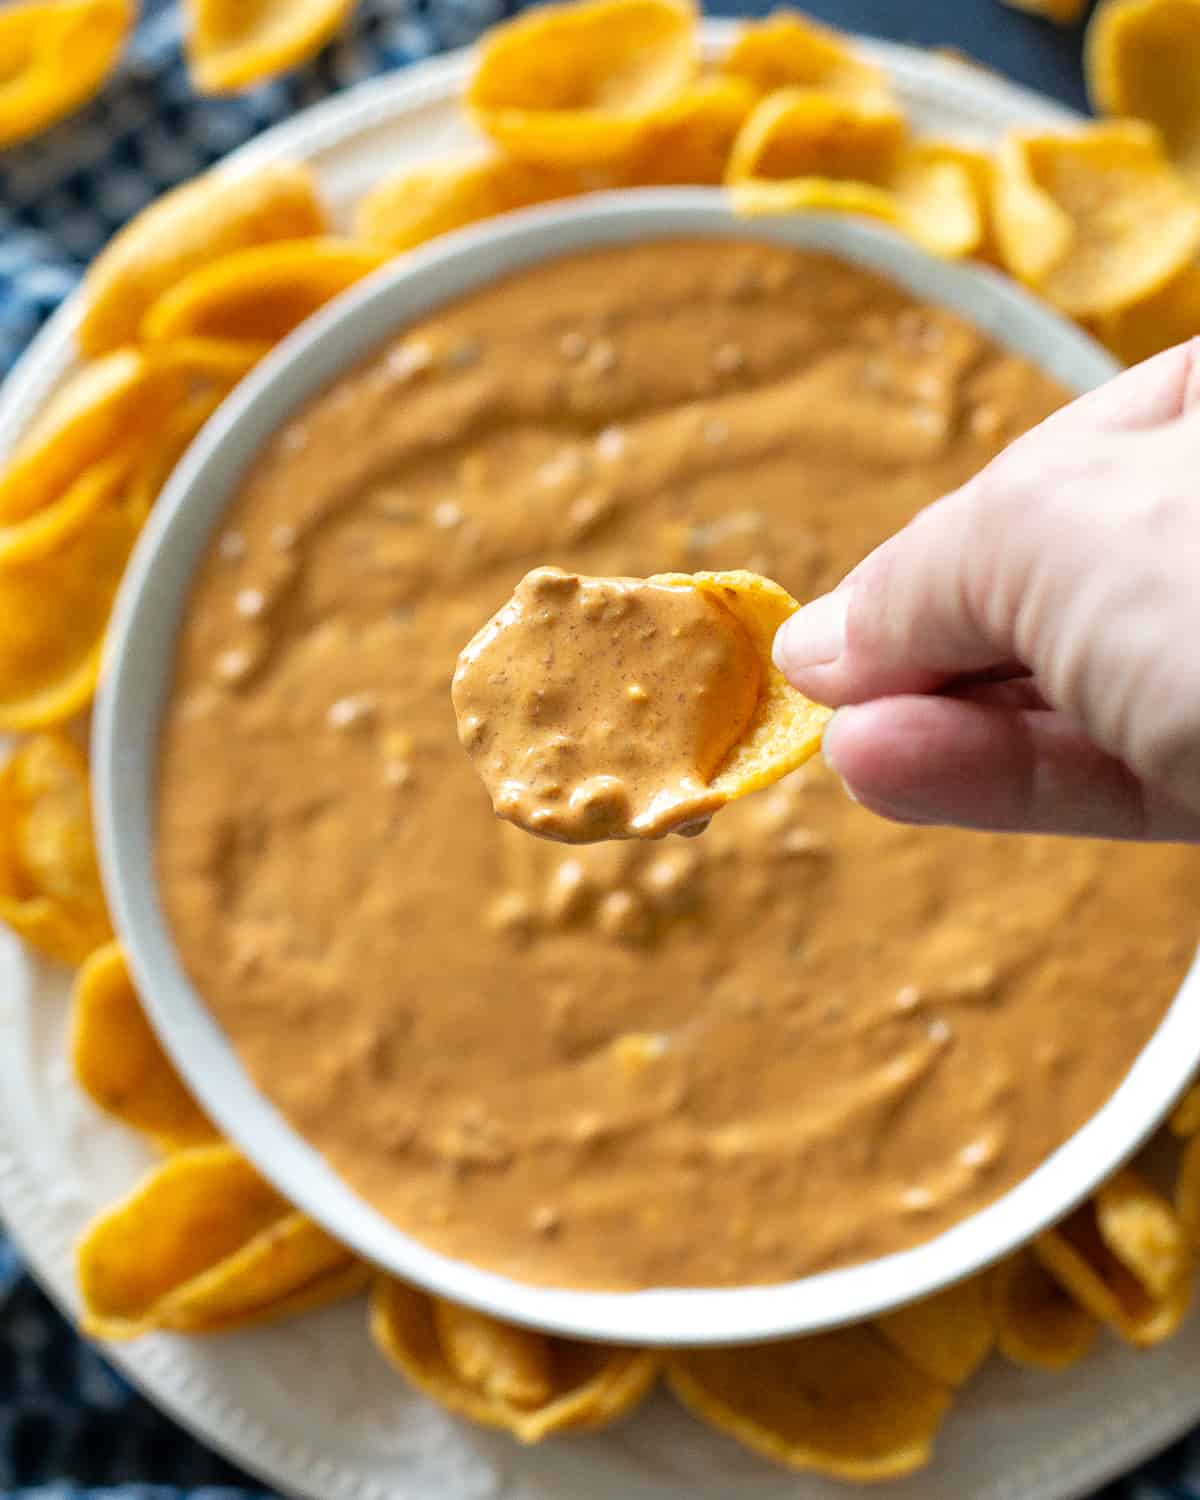 scoop of chili cheese dip